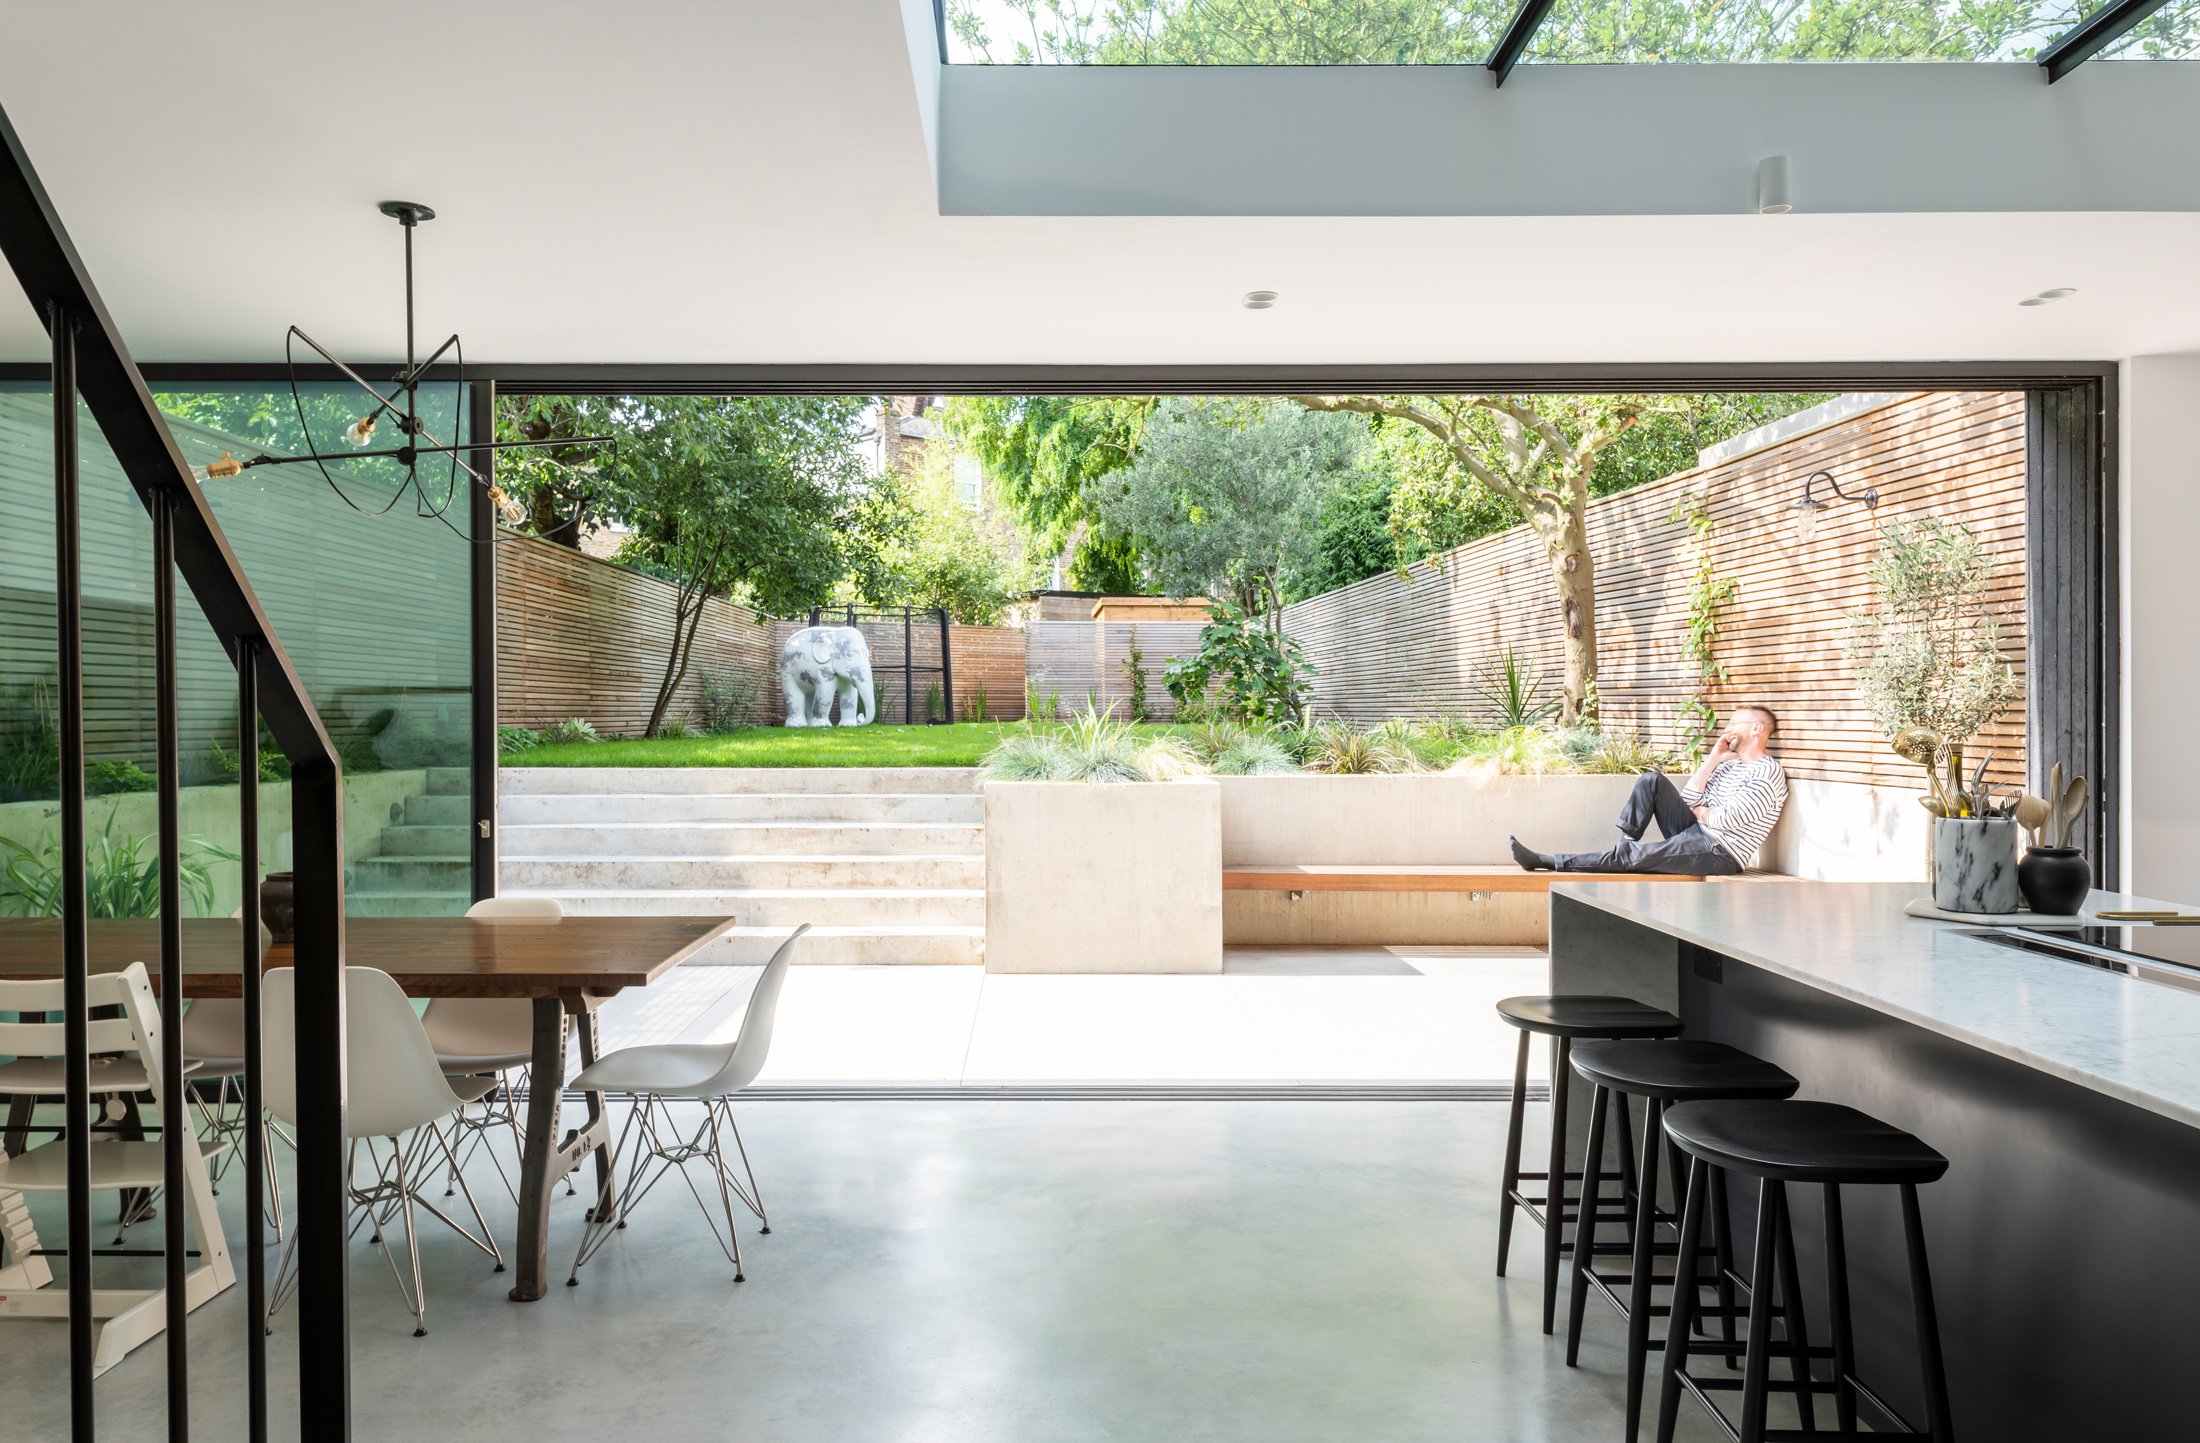 A large, modern kitchen extension with concrete flooring